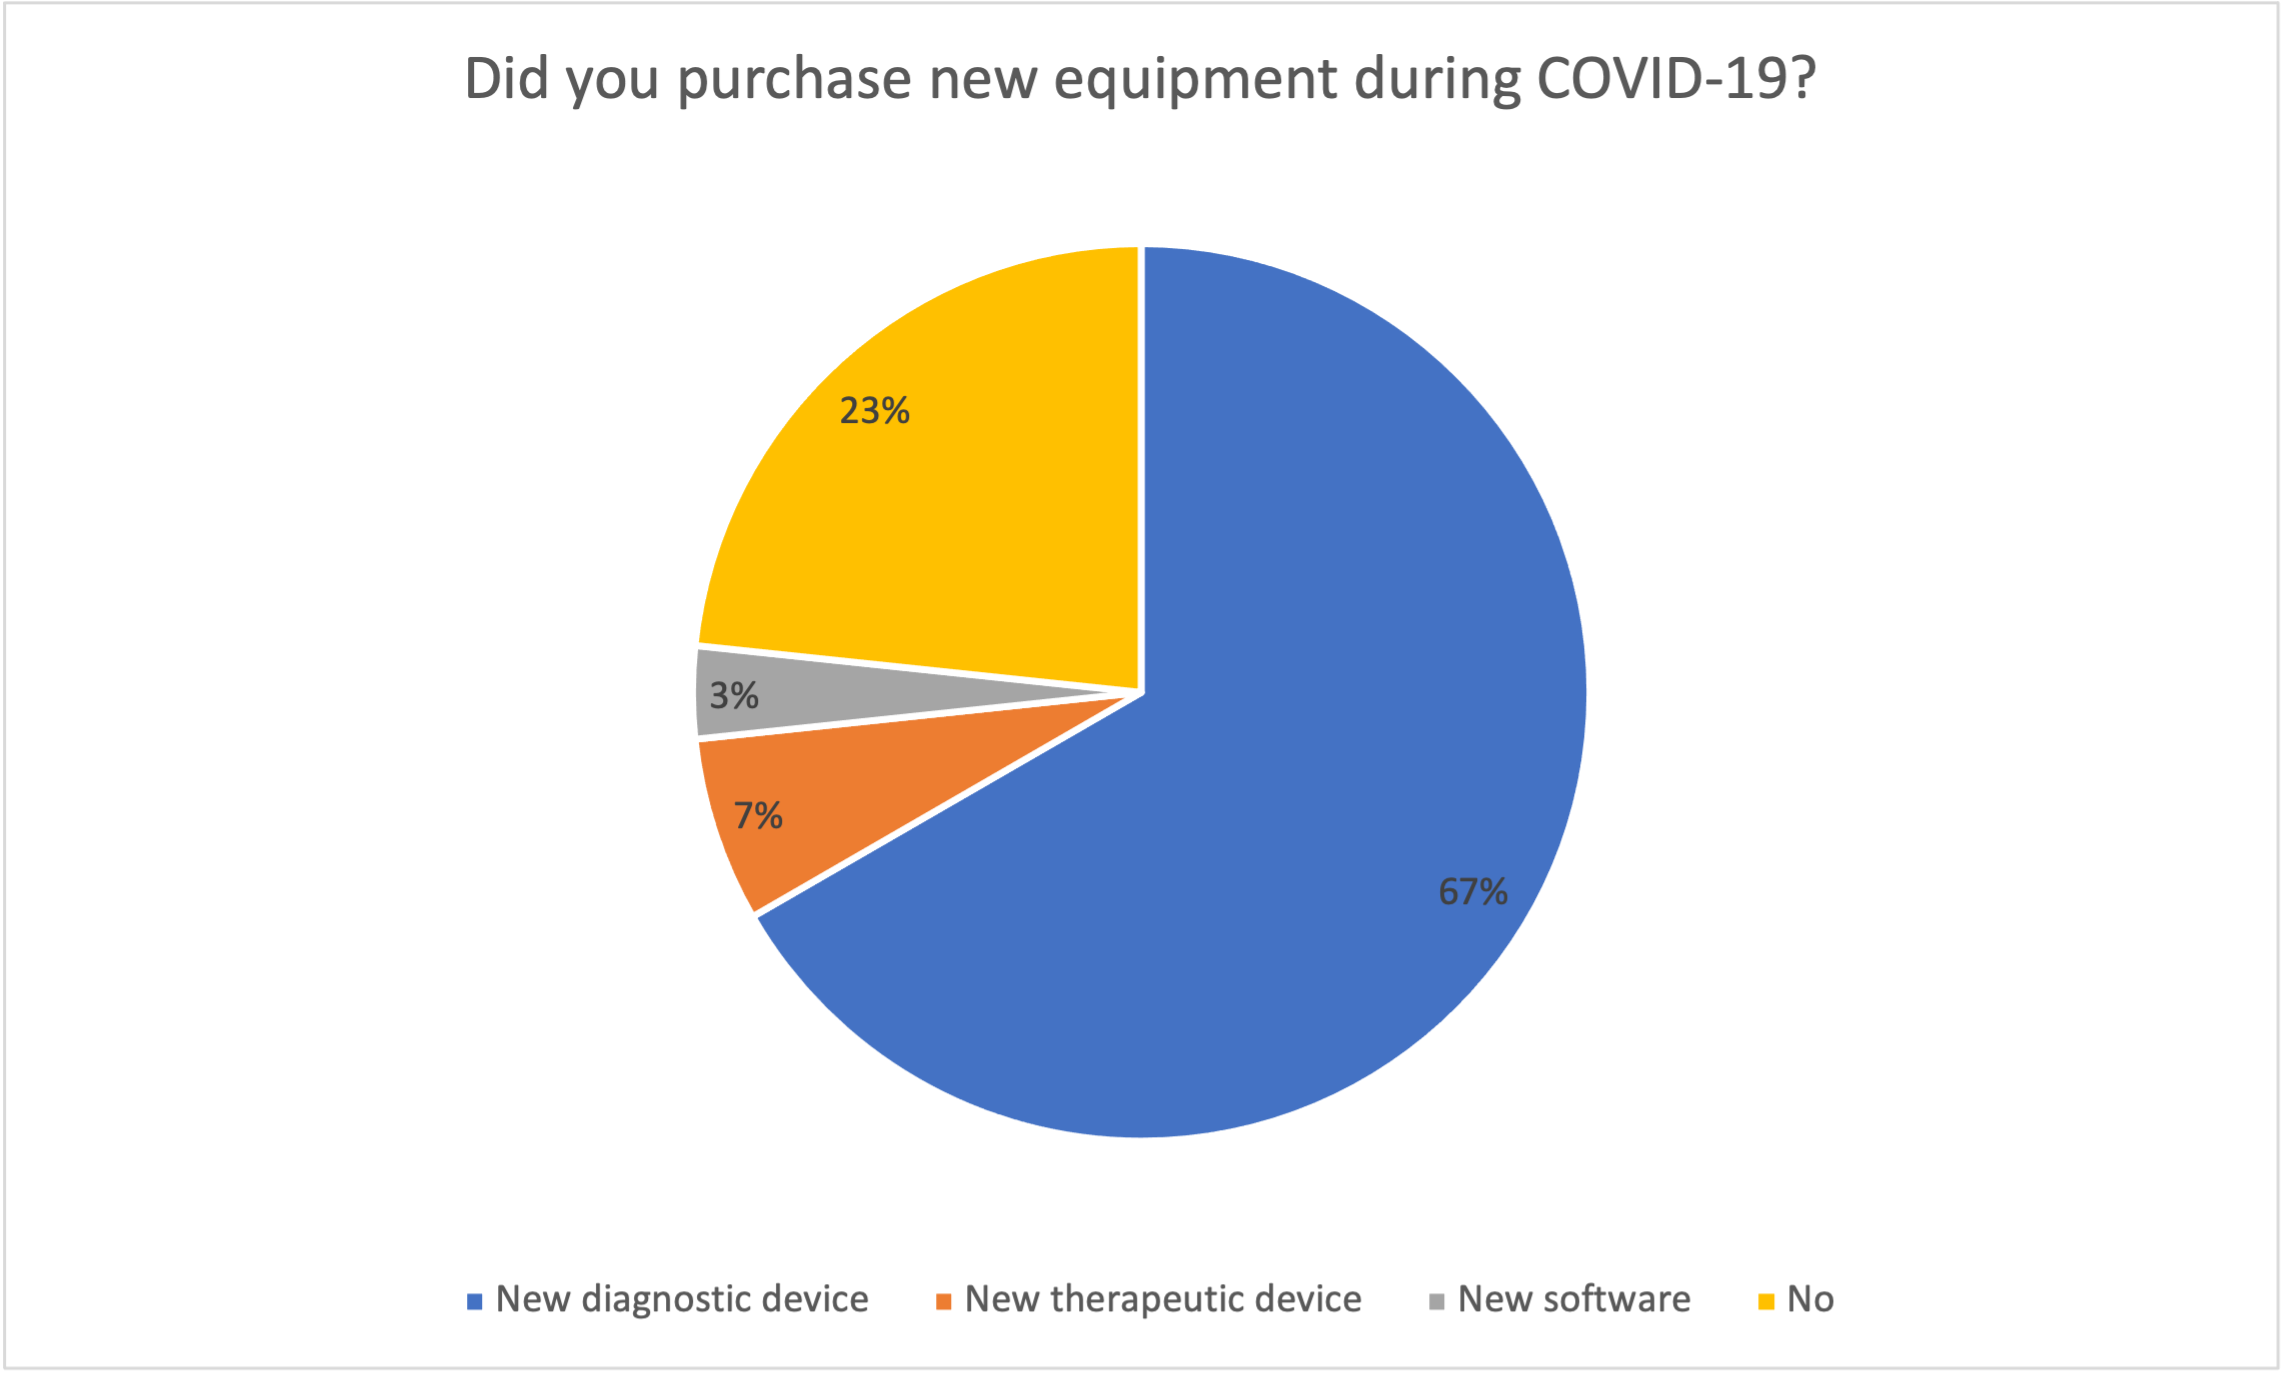 Poll results: Did you purchase new equipment during COVID-19?